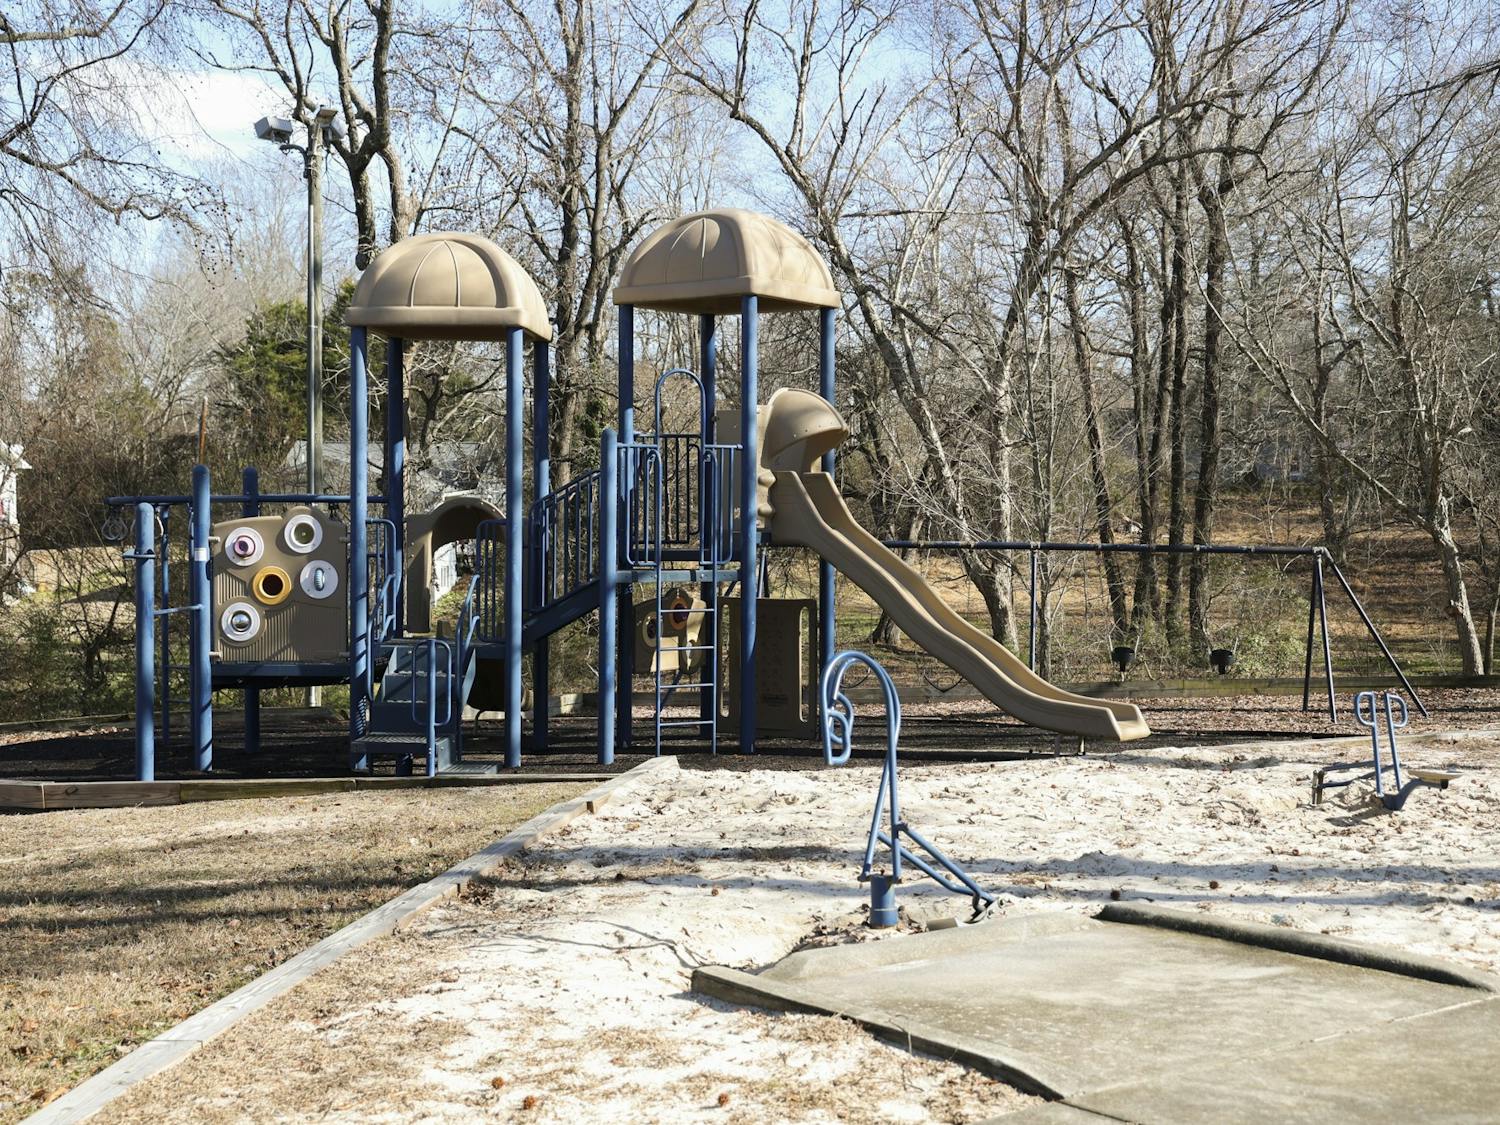 Henry W. Baldwin Park is located in Carrboro, N.C., pictured here on Wednesday, Jan. 18, 2023. Orange County is planning to use the rest of the Federal American Rescue Plan Act (ARPA) funds towards improving community spaces in Carrboro like Baldwin Park.